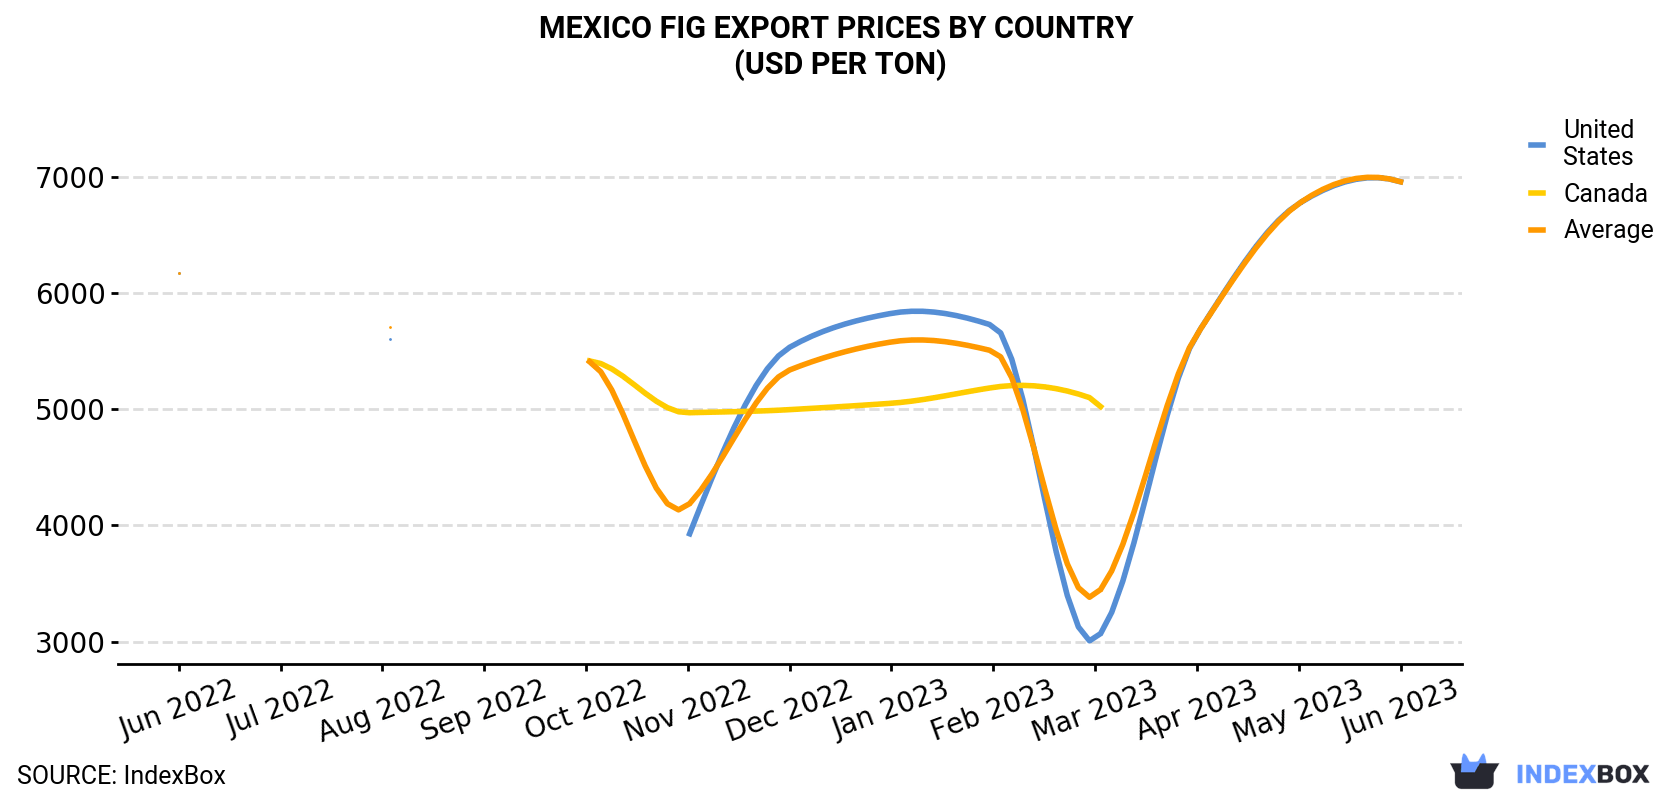 Mexico Fig Export Prices By Country (USD Per Ton)